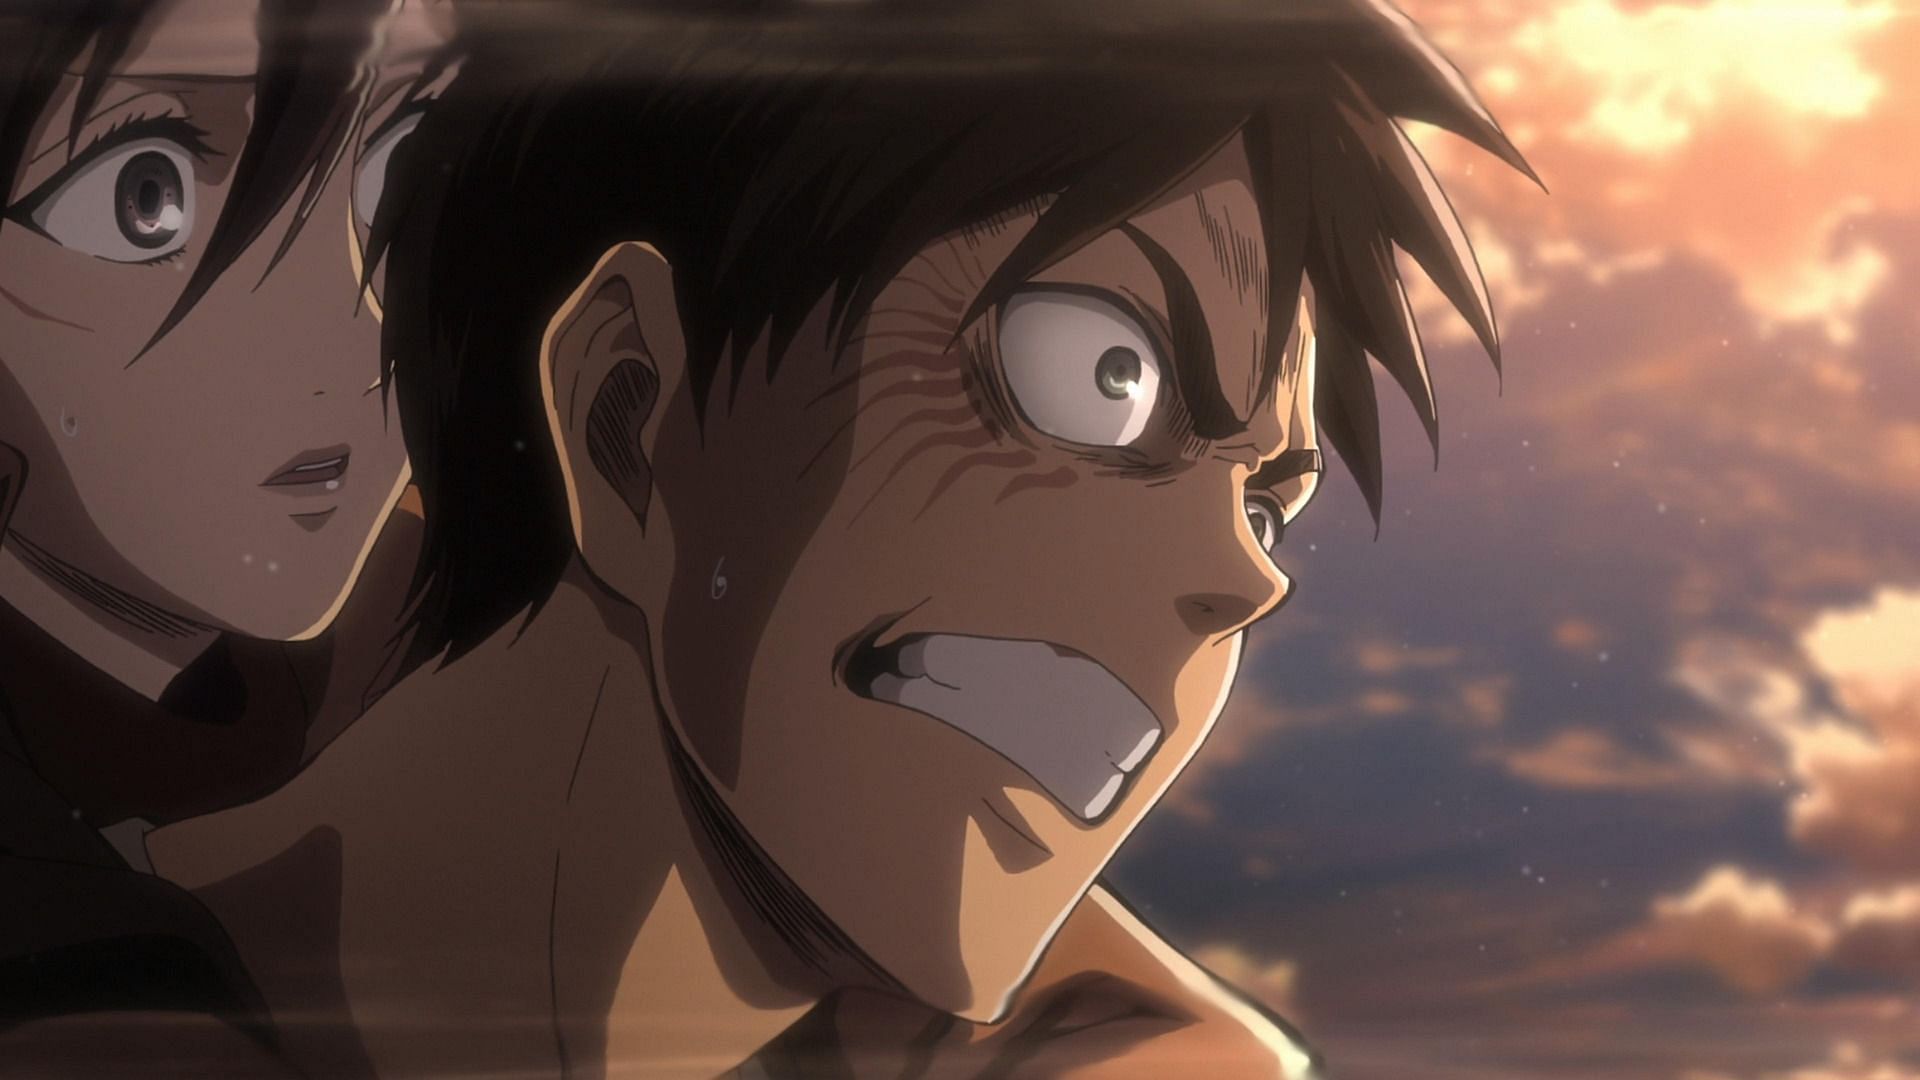 Attack on Titan placates fans with new Eren illustration (Image via Wit Studio)